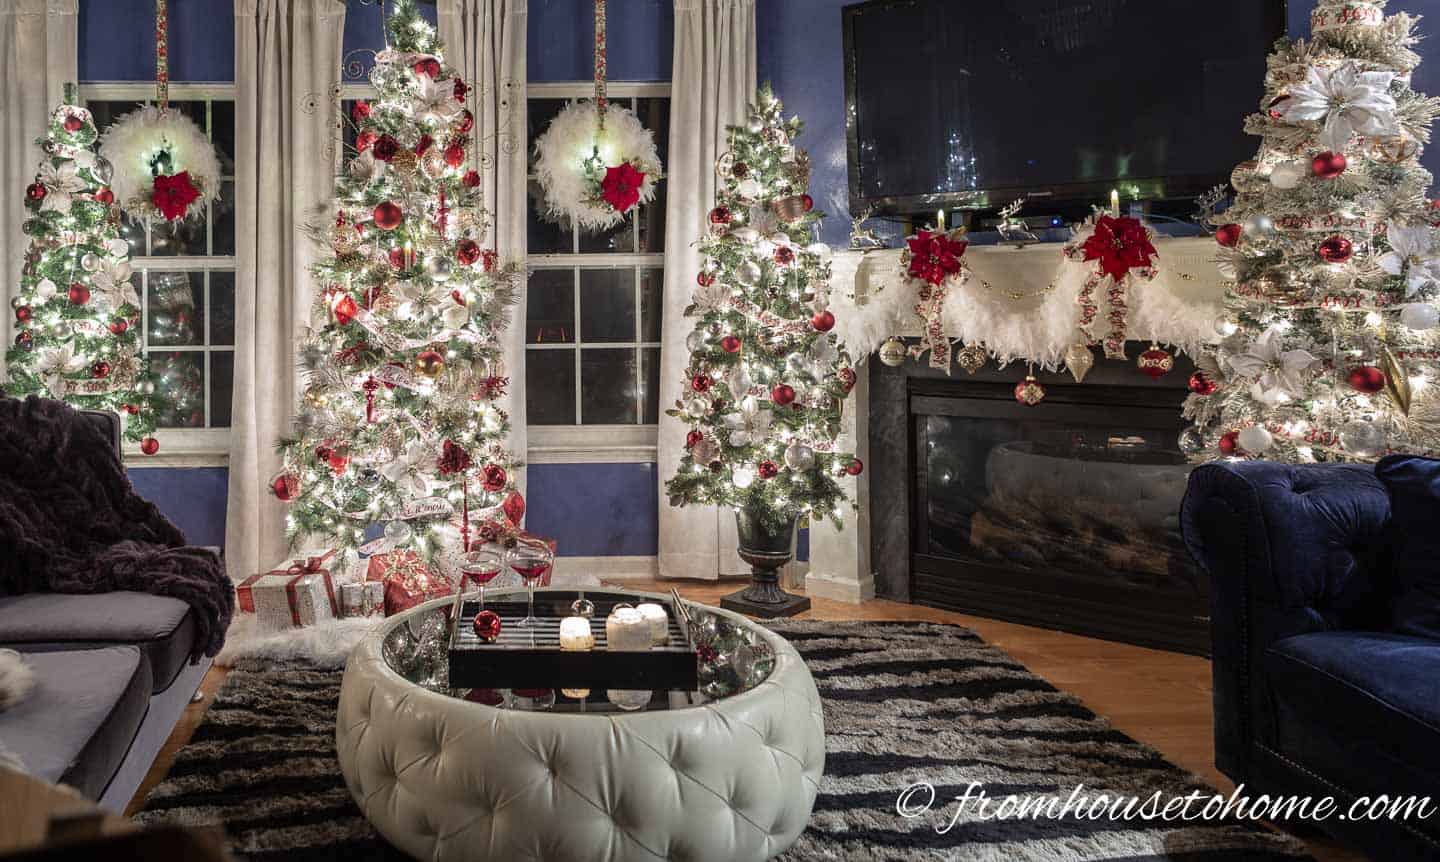 A living room with 4 Christmas trees decorated in red, white and gold Christmas decorations, 2 white wreaths on the windows and a white garland over the fireplace